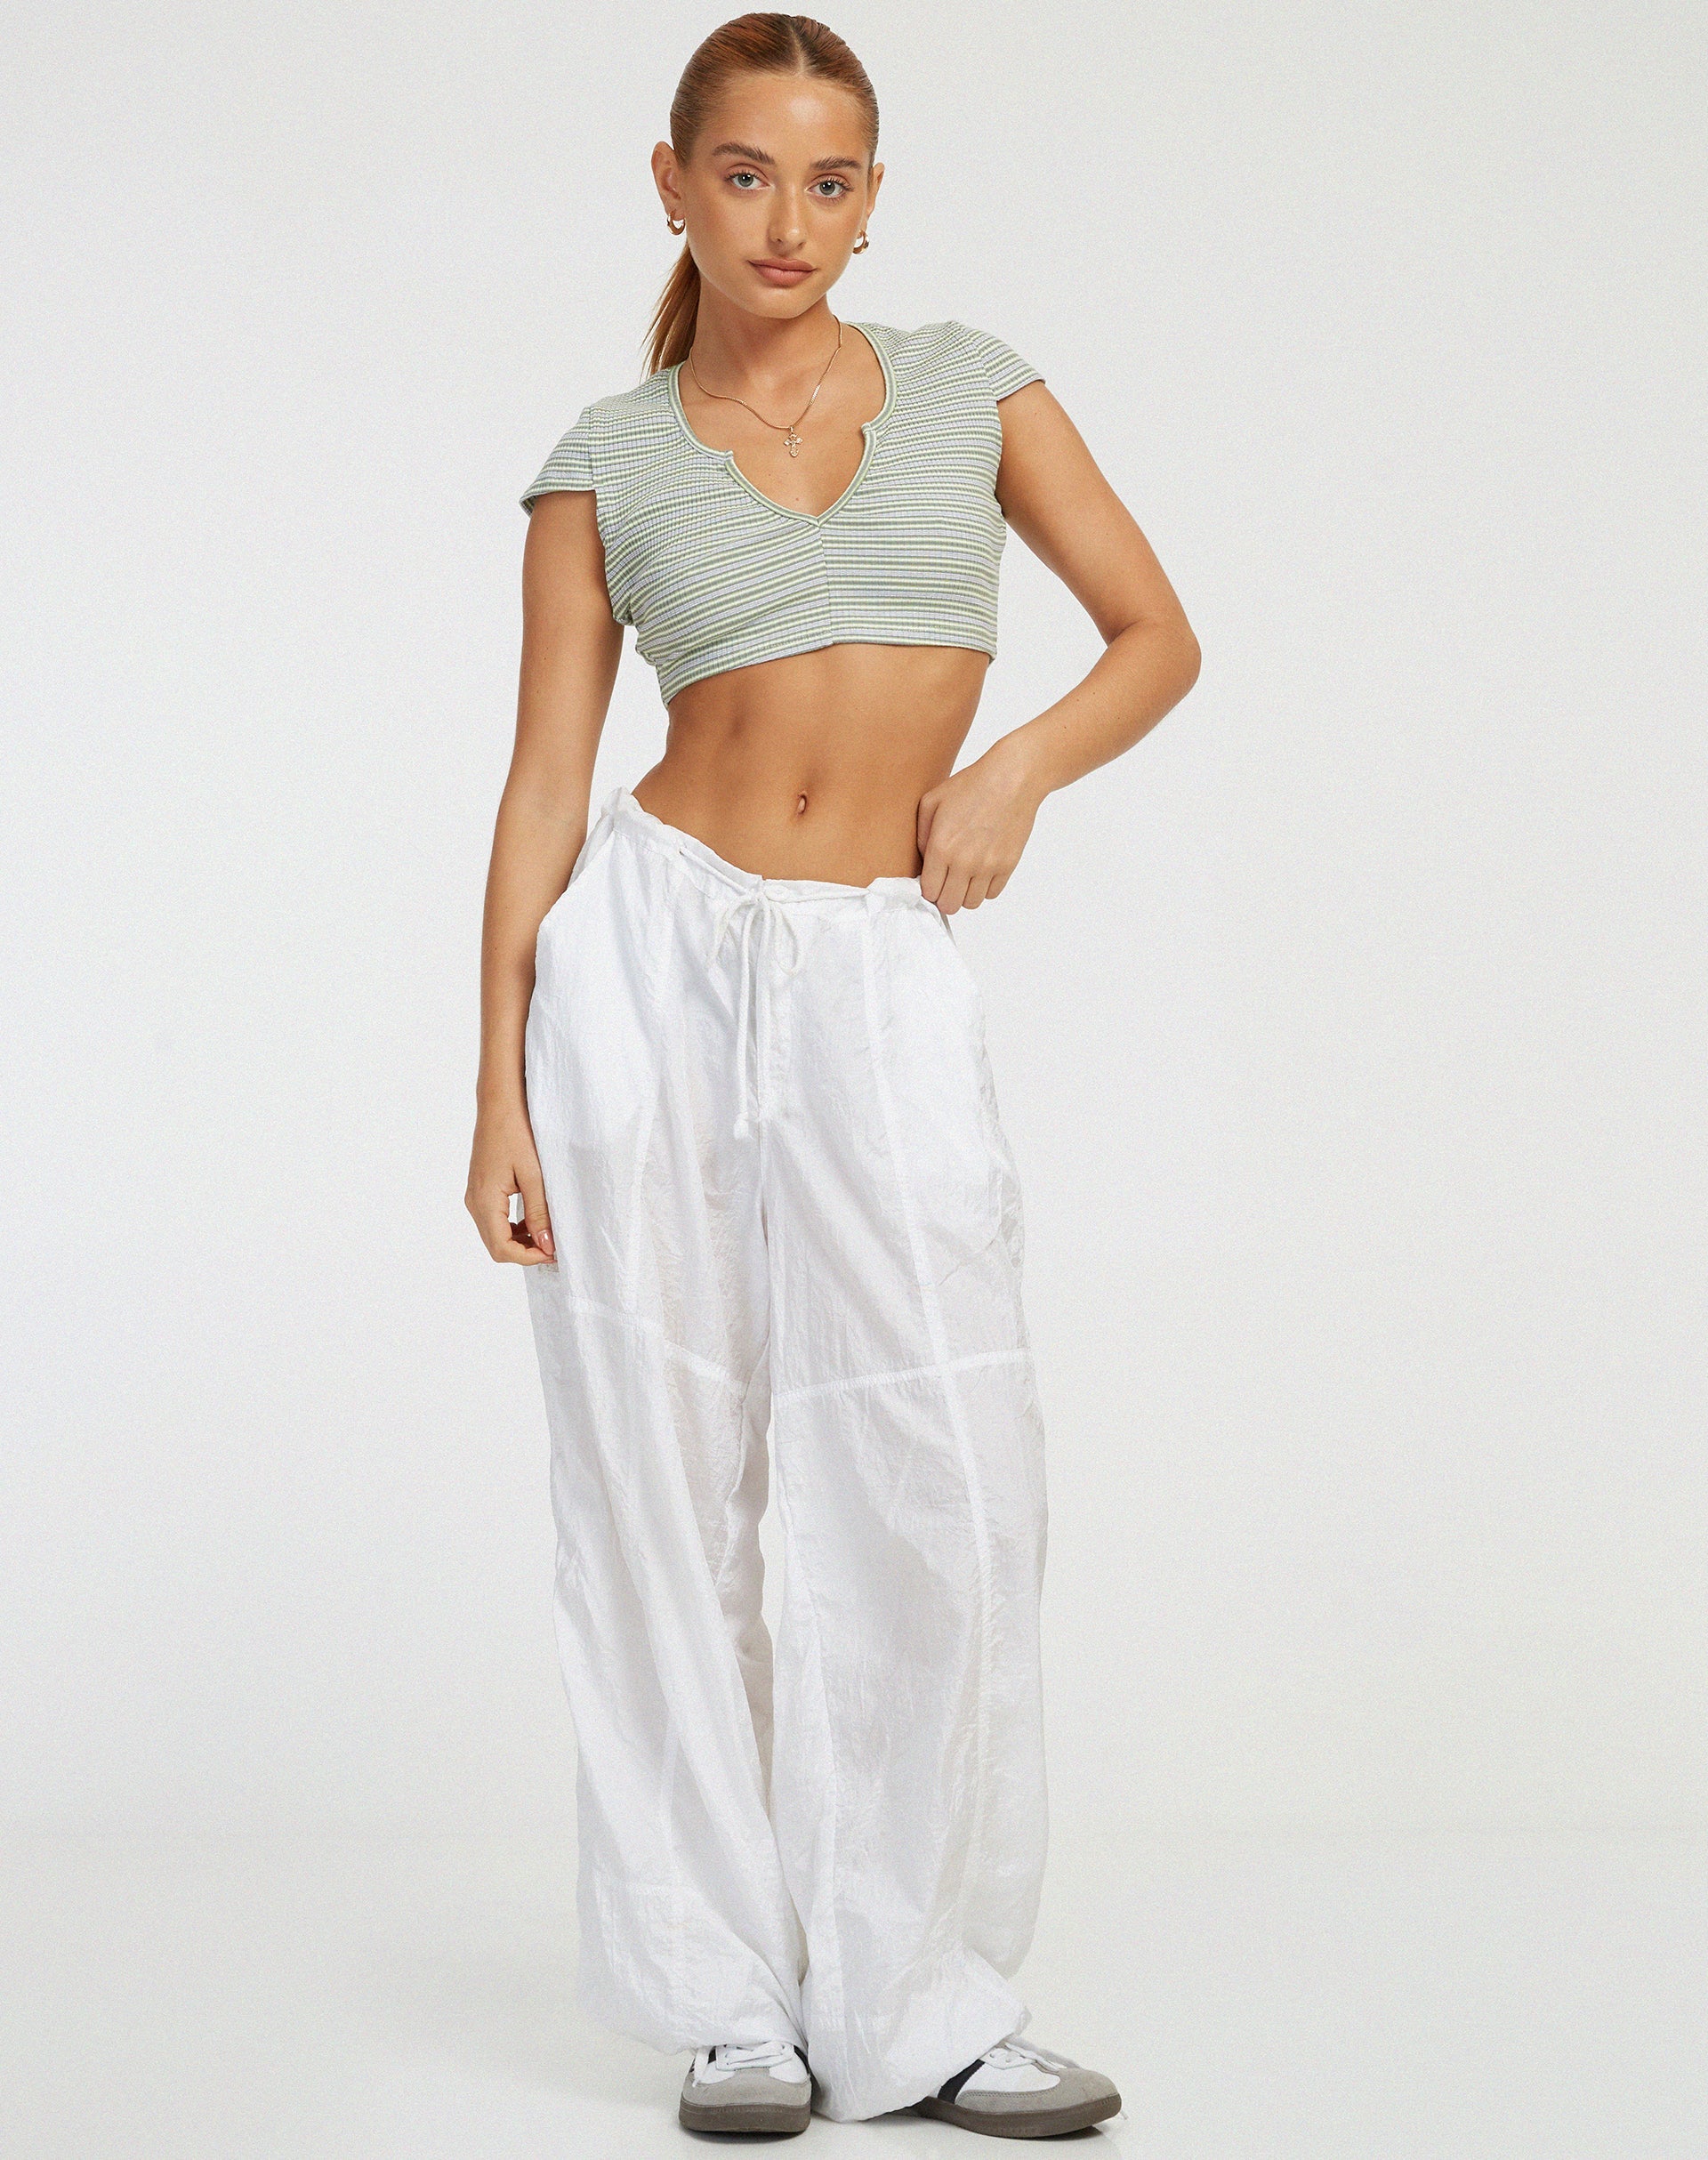 image of Guanna Crop Top in Stripe Rib Green and Grey